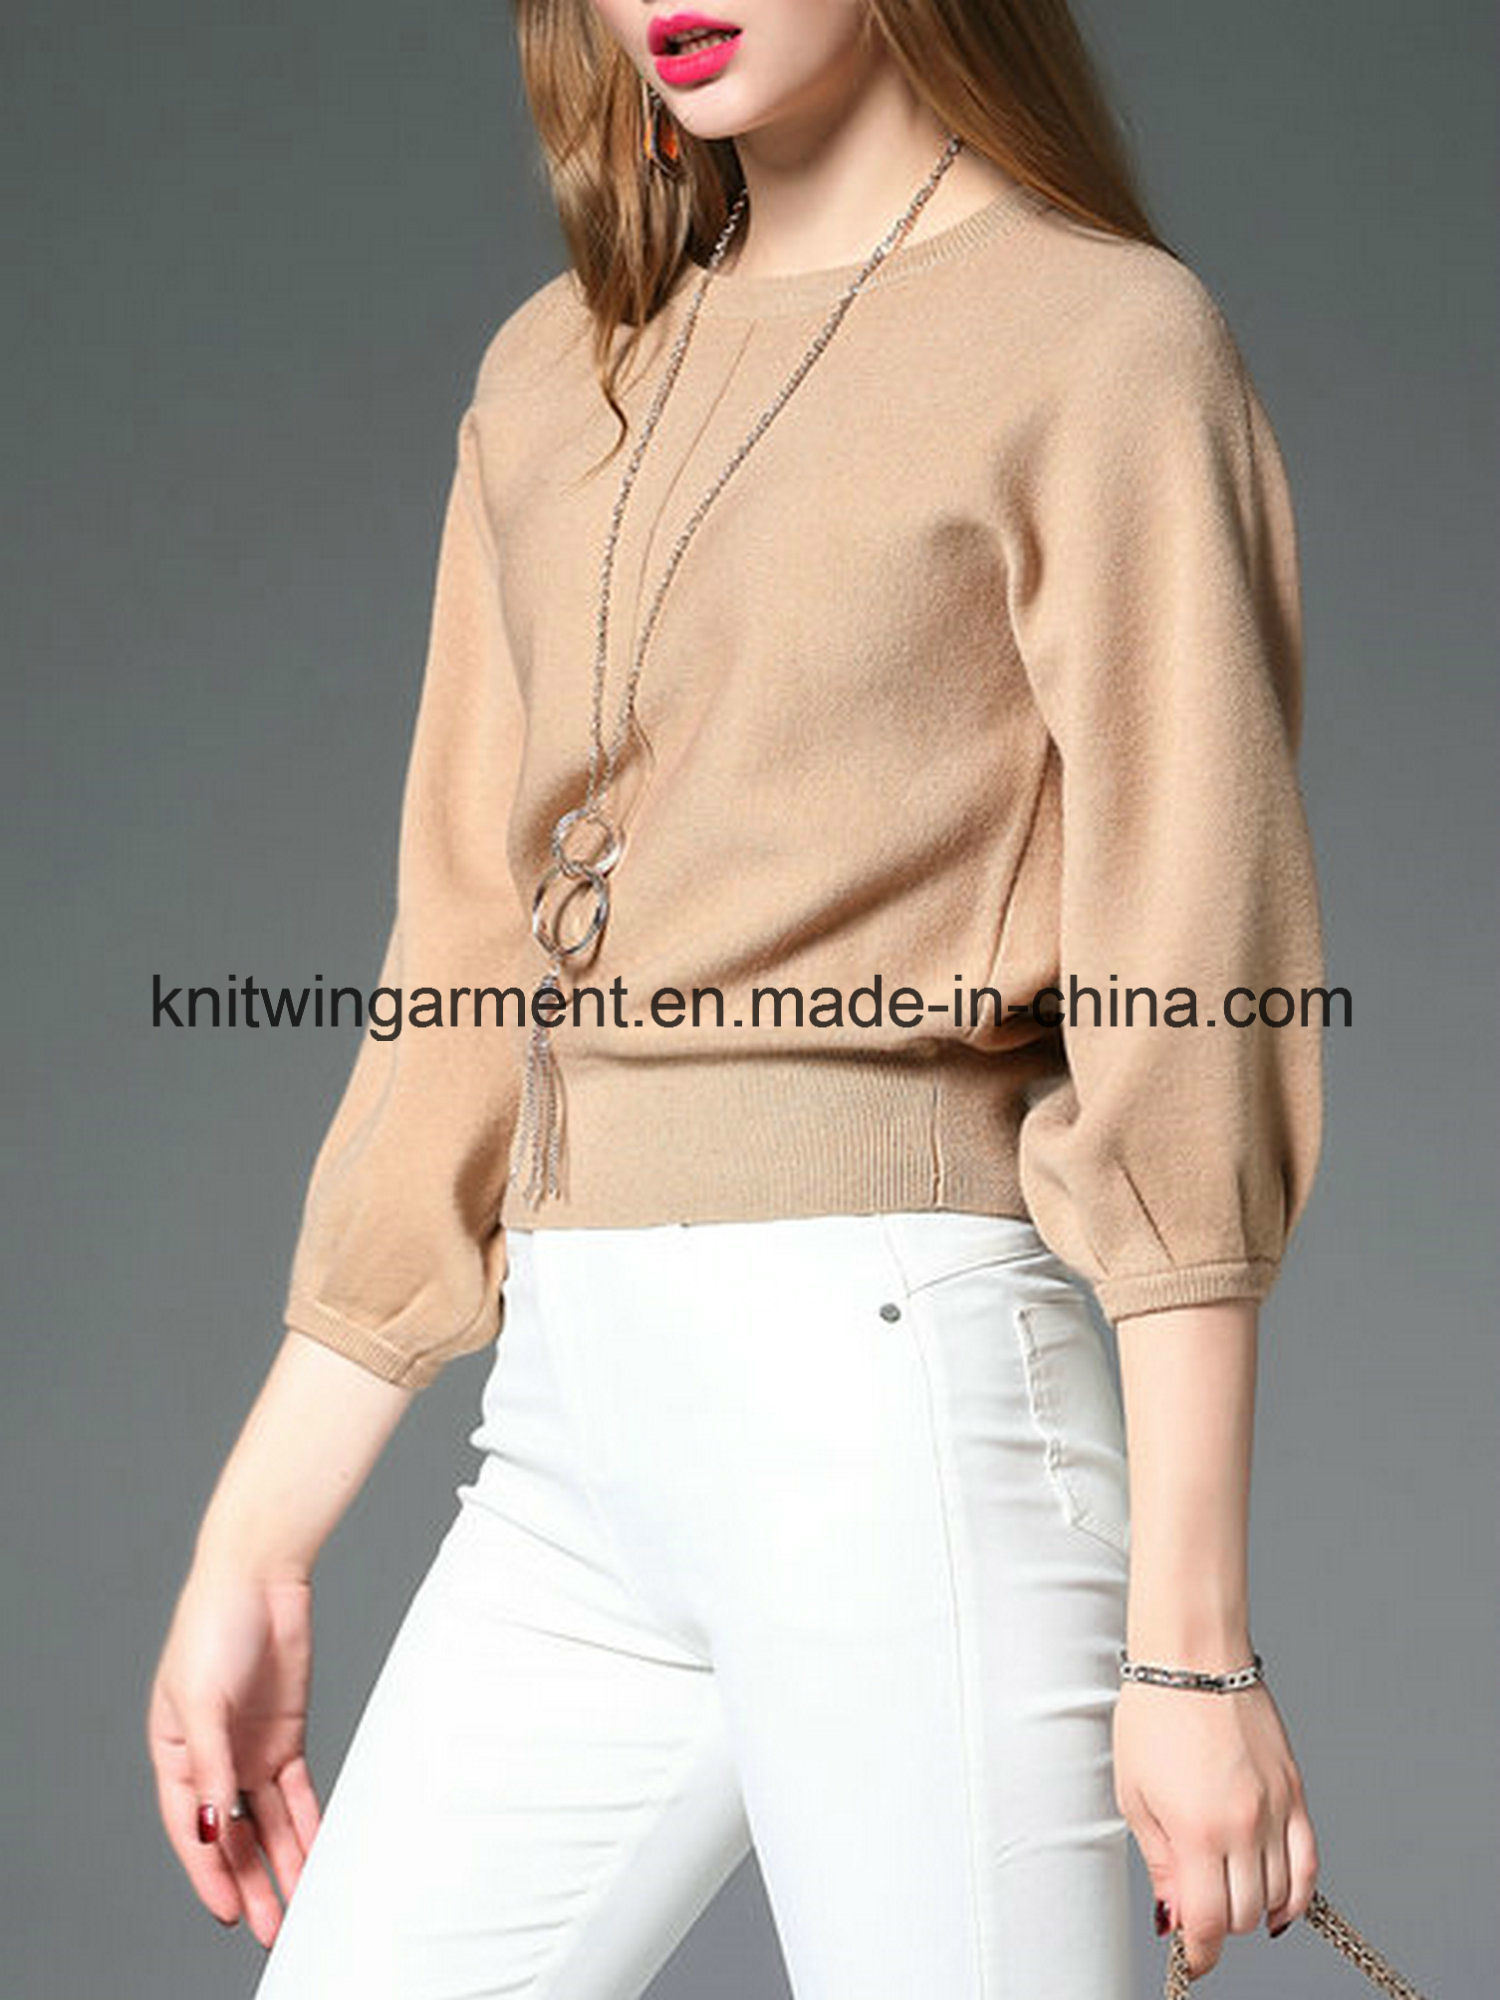 Knitted 3/4 Sleeve Casual Crew Neck Sweater (w18-610)